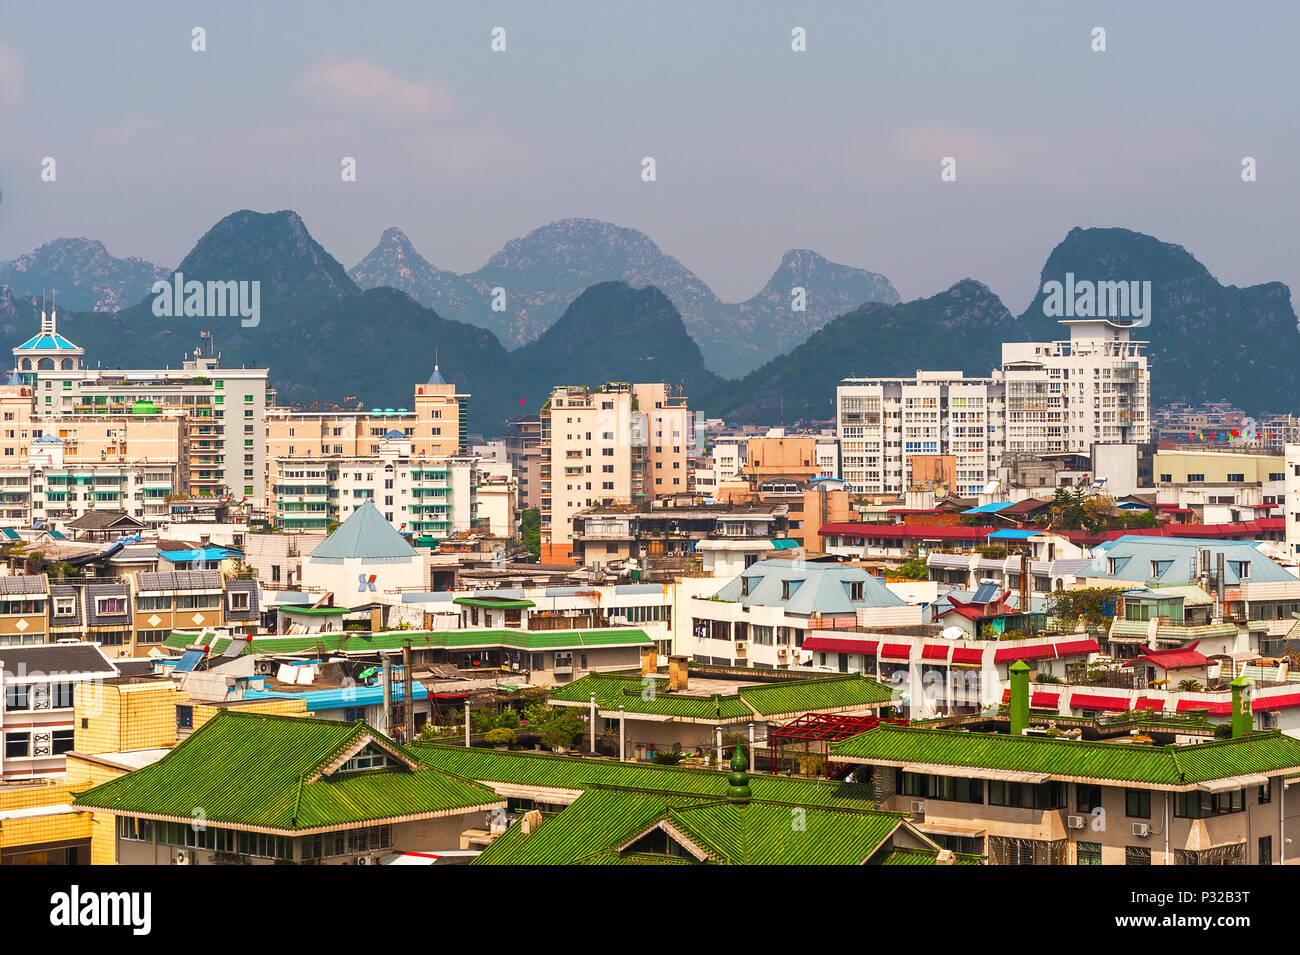 Guilin, China - September 30, 2008: View at the city of Guilin and the Karst mountains at the background. Stock Photo